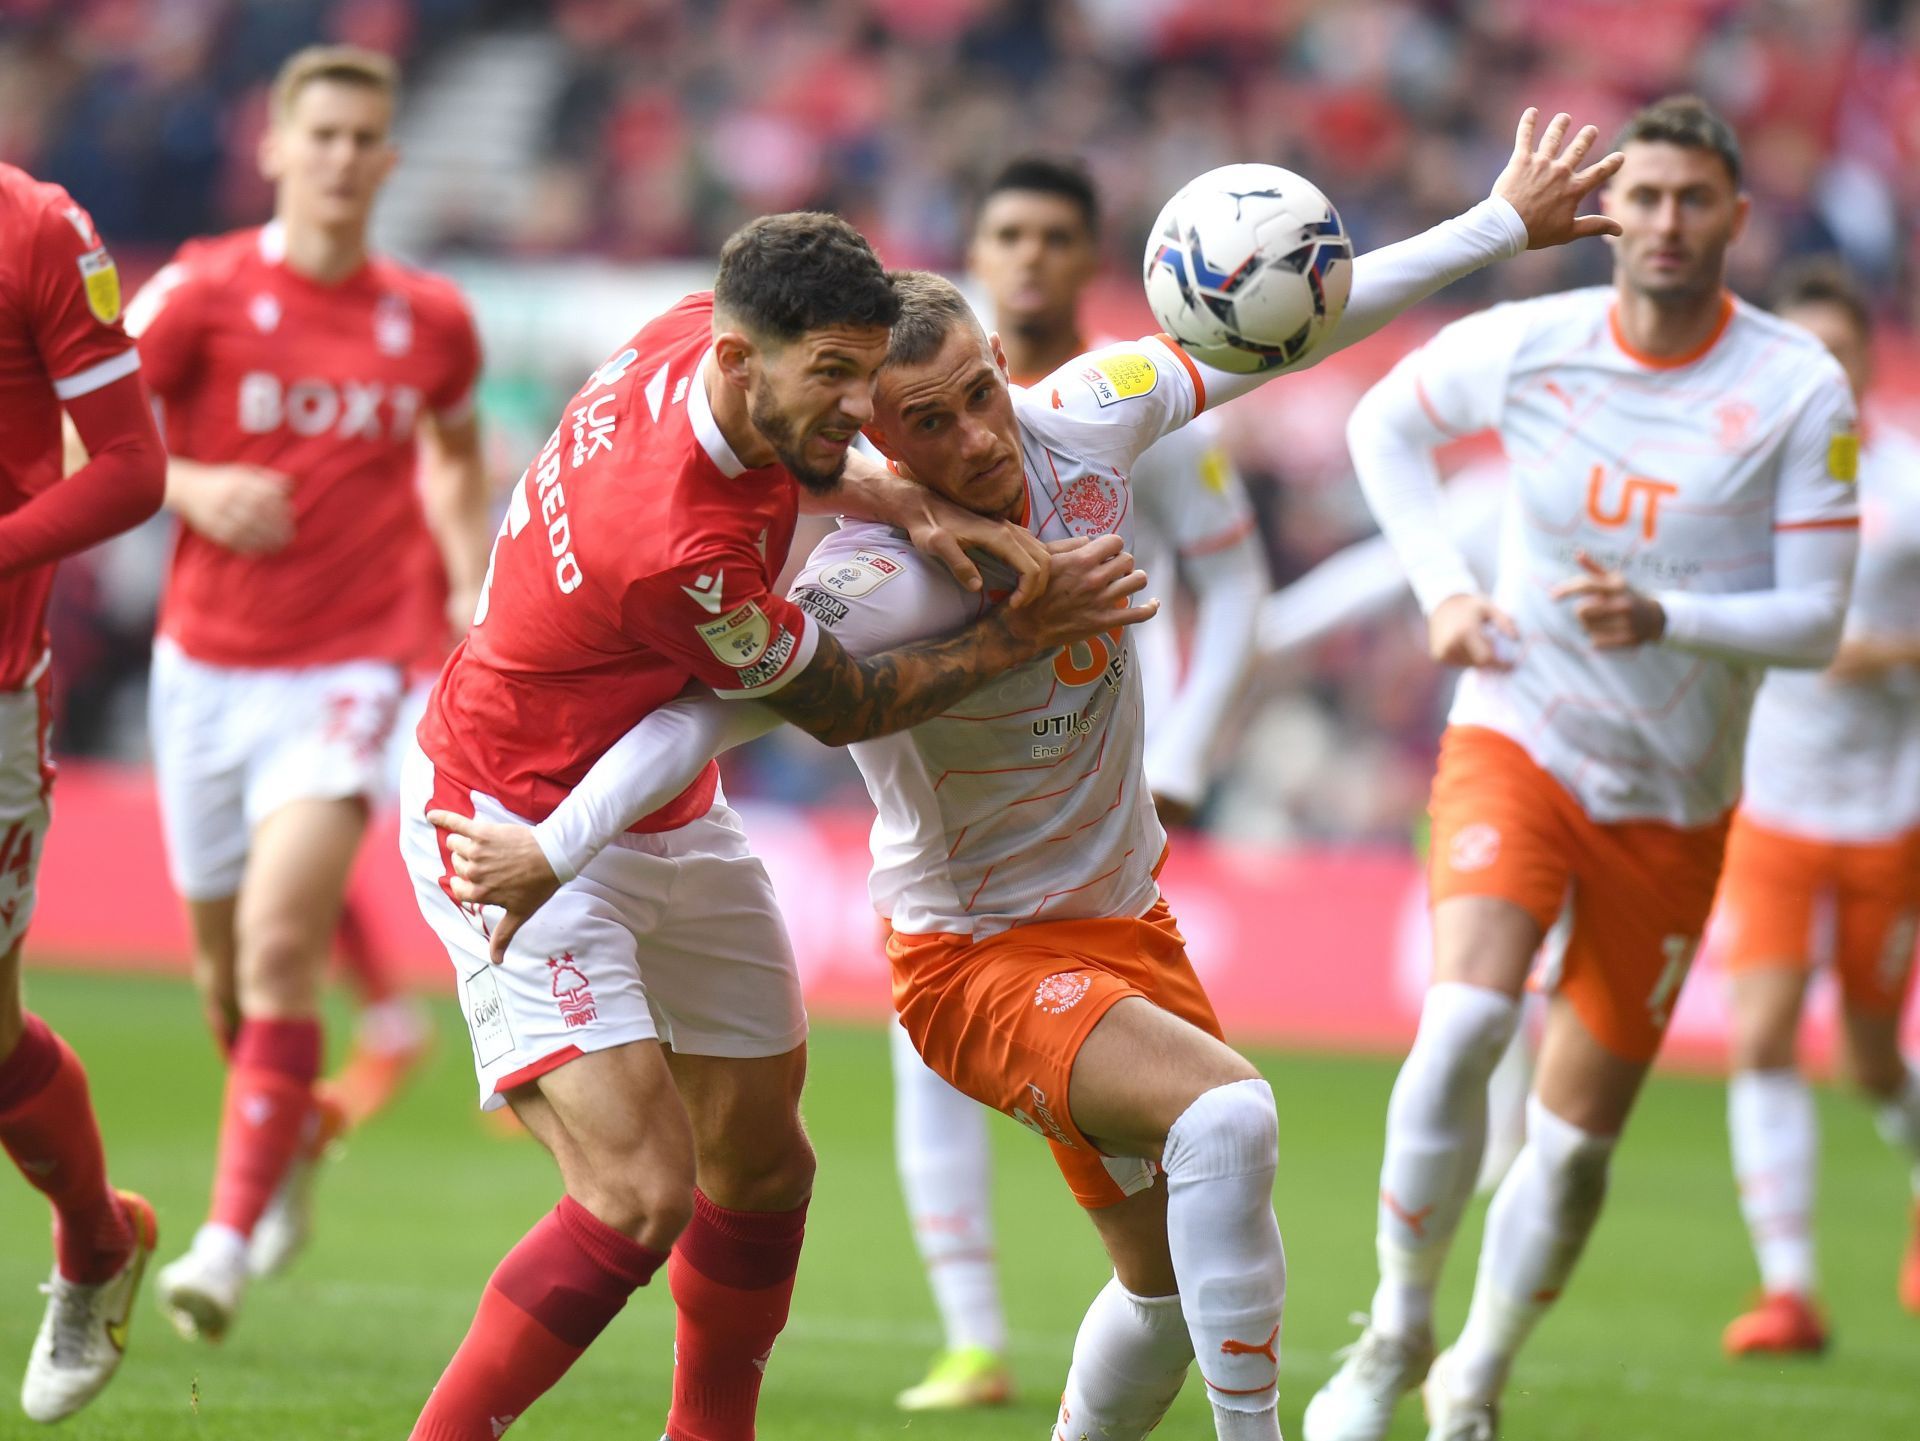 Nottingham Forest haven&#039;t done the league double over Blackpool in over 50 years